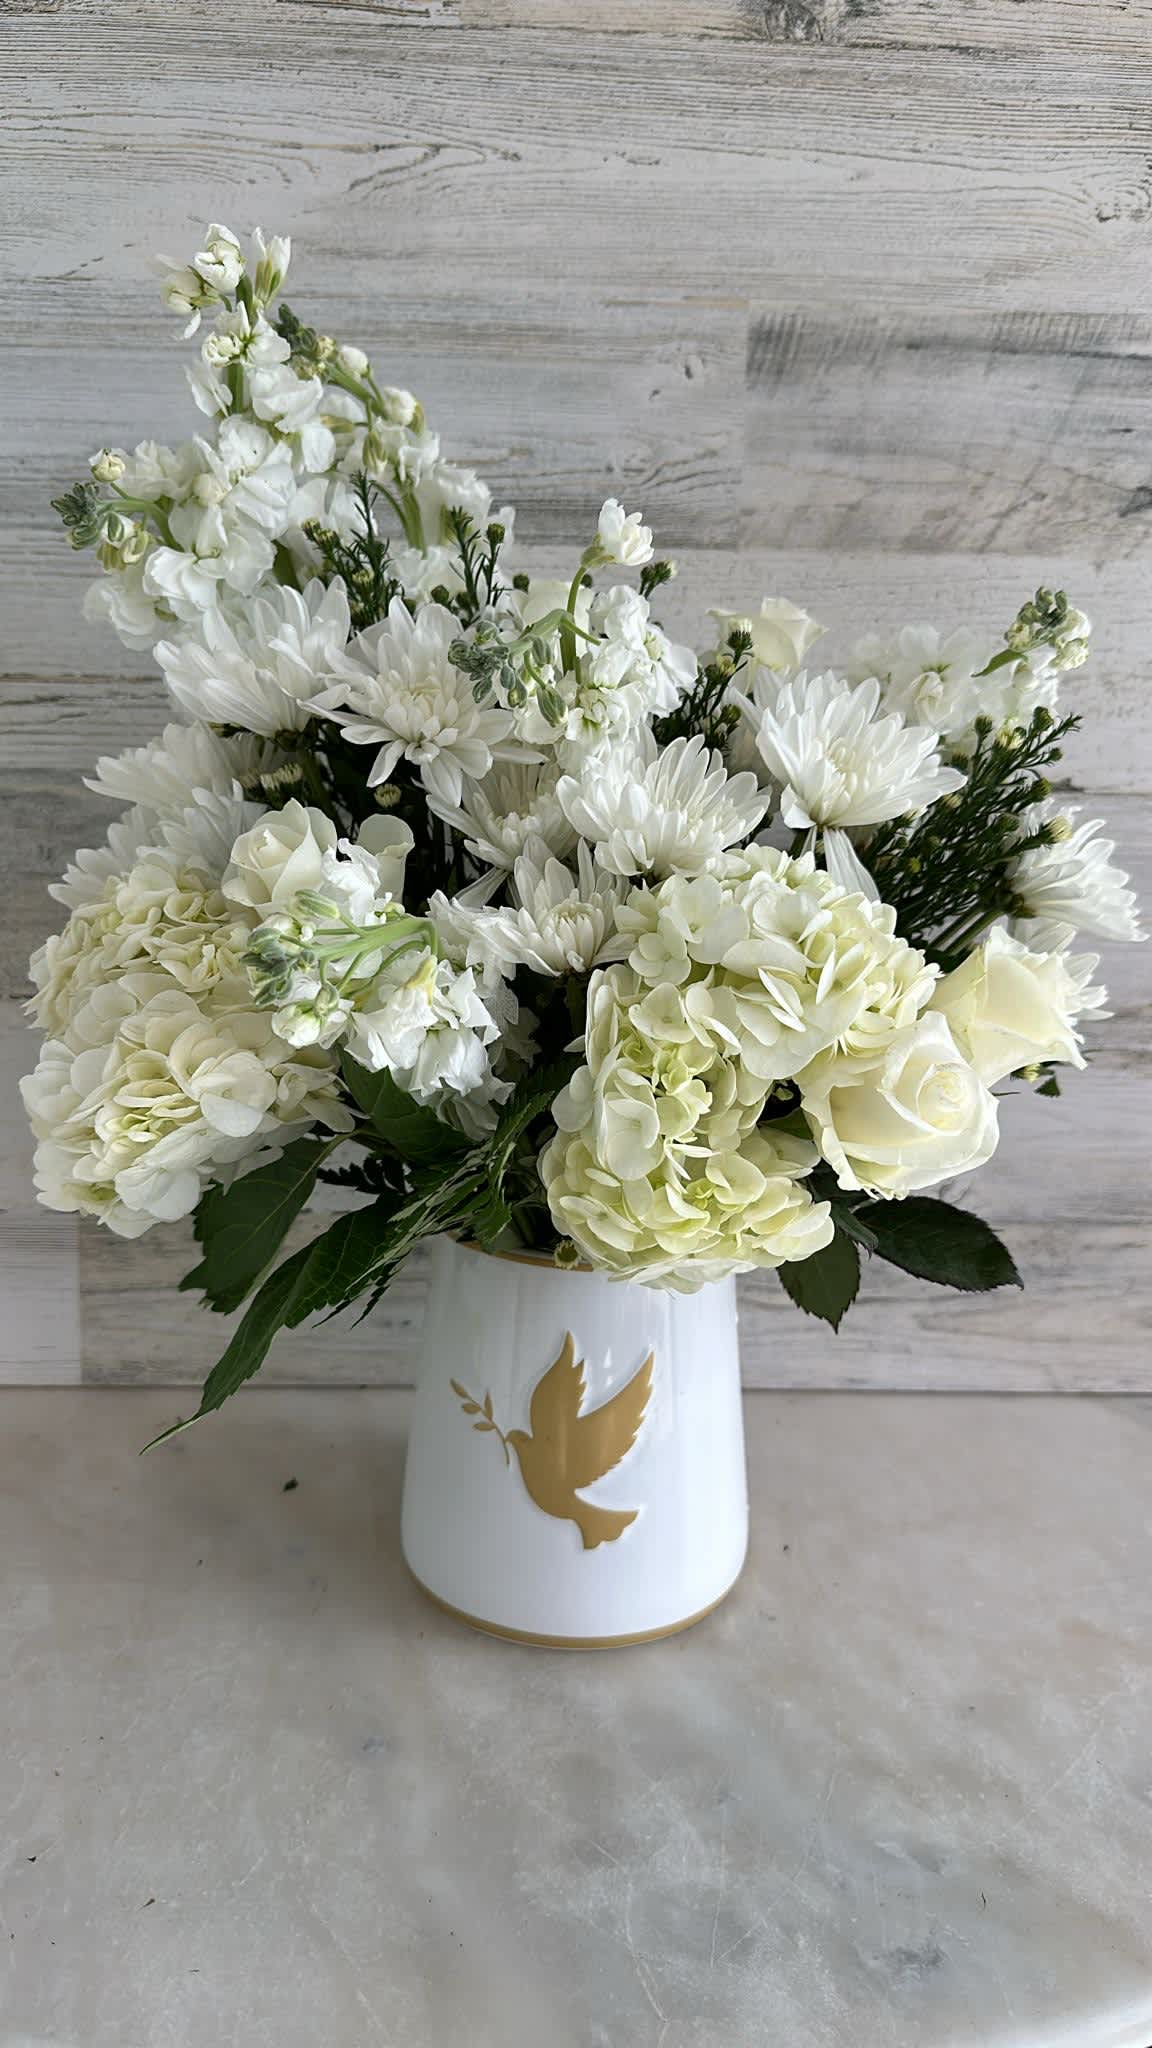 The Dove - white arrangement with a finest white ceramic container with a dove, the arrangement has hydrangeas, roses, stocks and mums